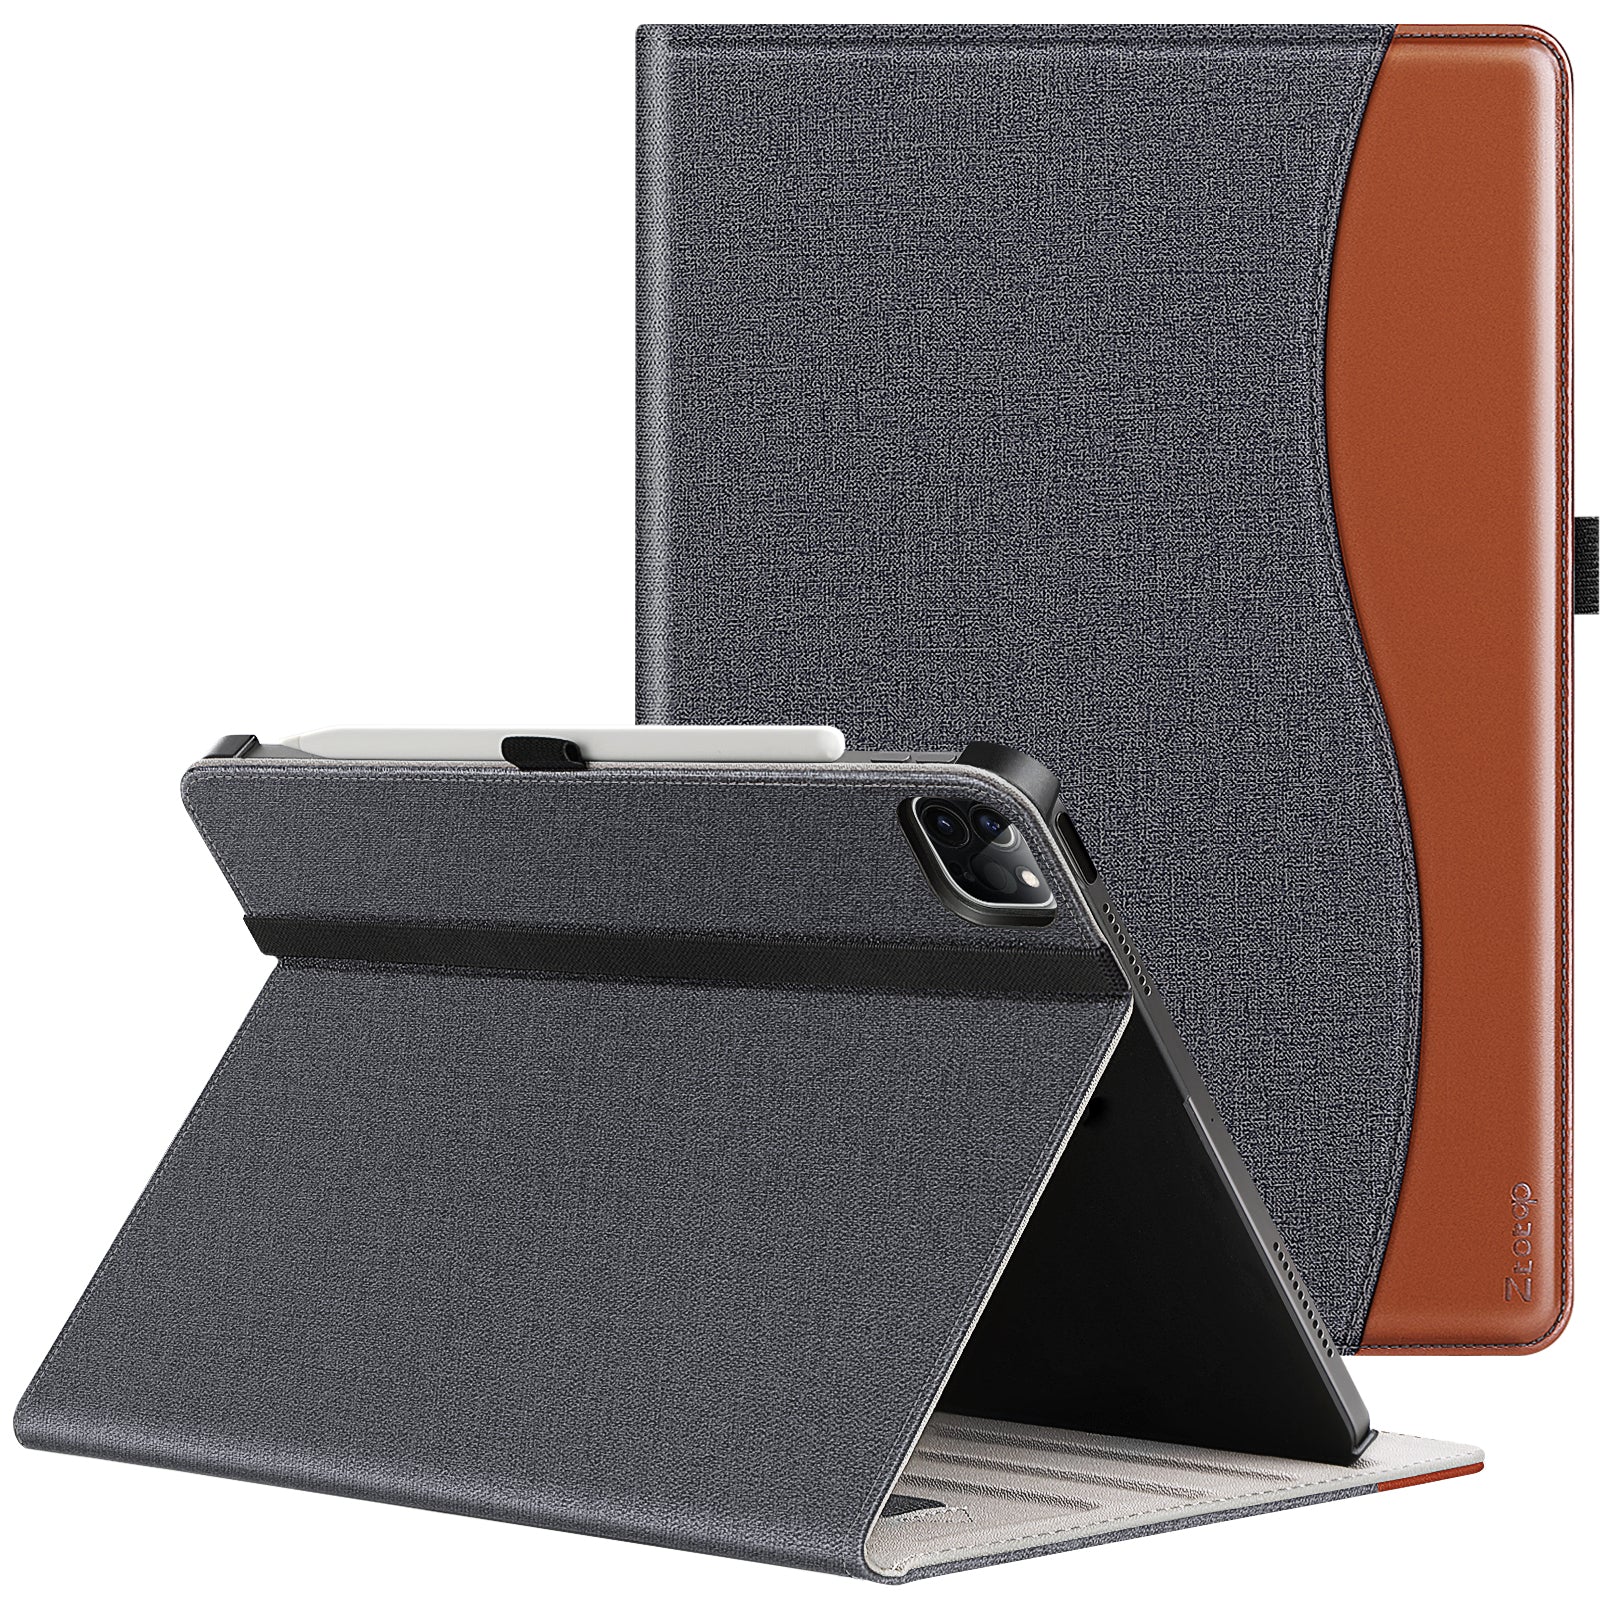 ZtotopCases for iPad Pro 12.9 Case 6th/5th/4th/3rd Generation 2022/2021/2020/2018, Premium PU Leather Folio Cover - Auto Wake/Sleep - Pencil Charging for 12.9 Inch 6/5/4/3 Gen